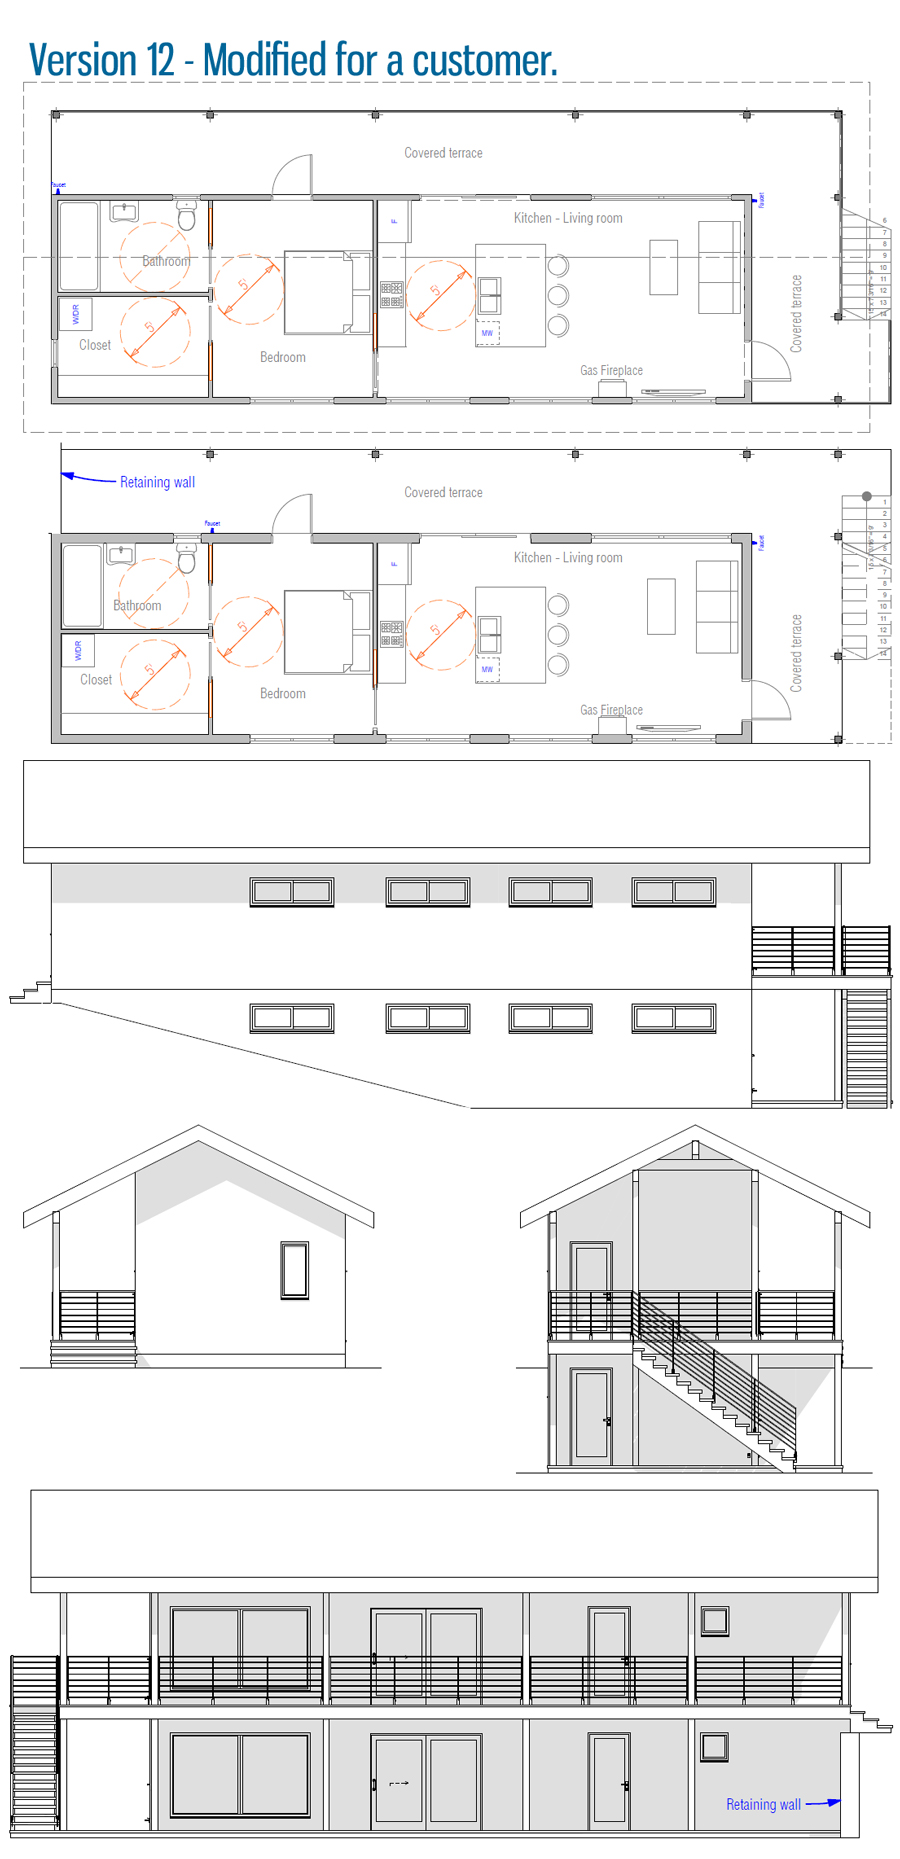 cost-to-build-less-than-100-000_68_HOUSE_PLAN_CH453_V12.jpg